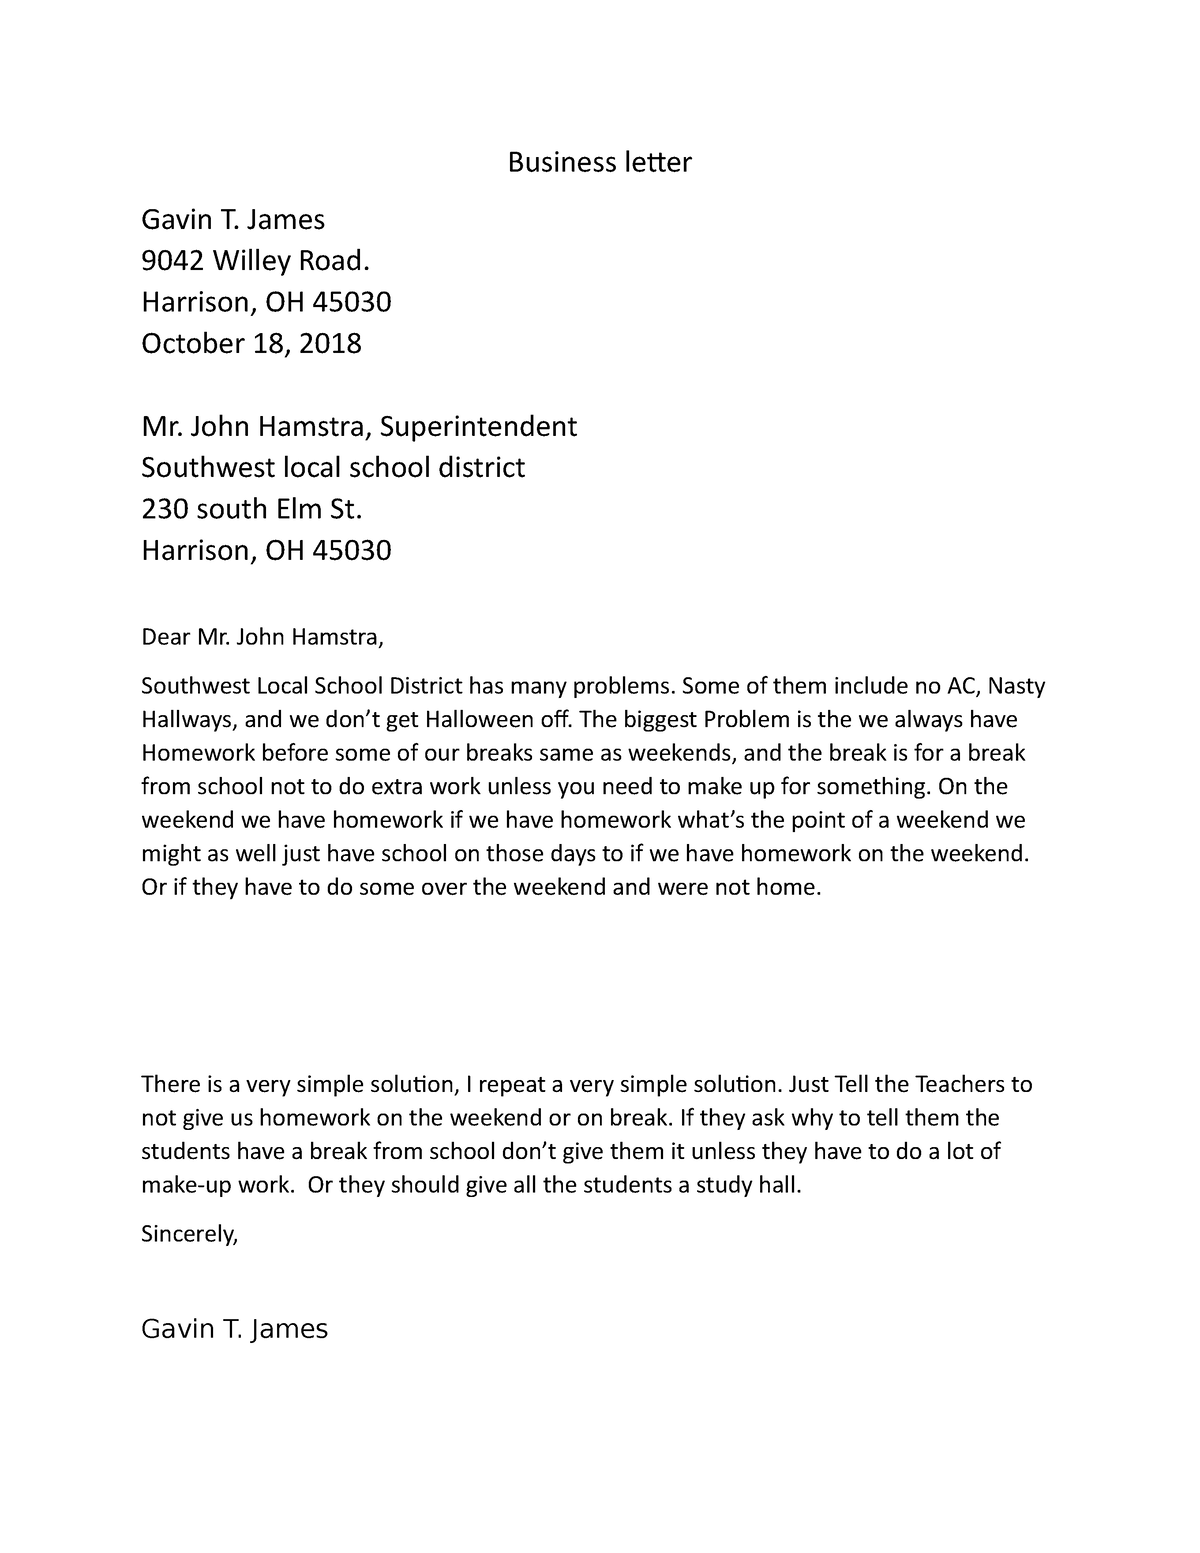 Buisness Letter - n/a - The Great Gatsby - Business letter Gavin T ...